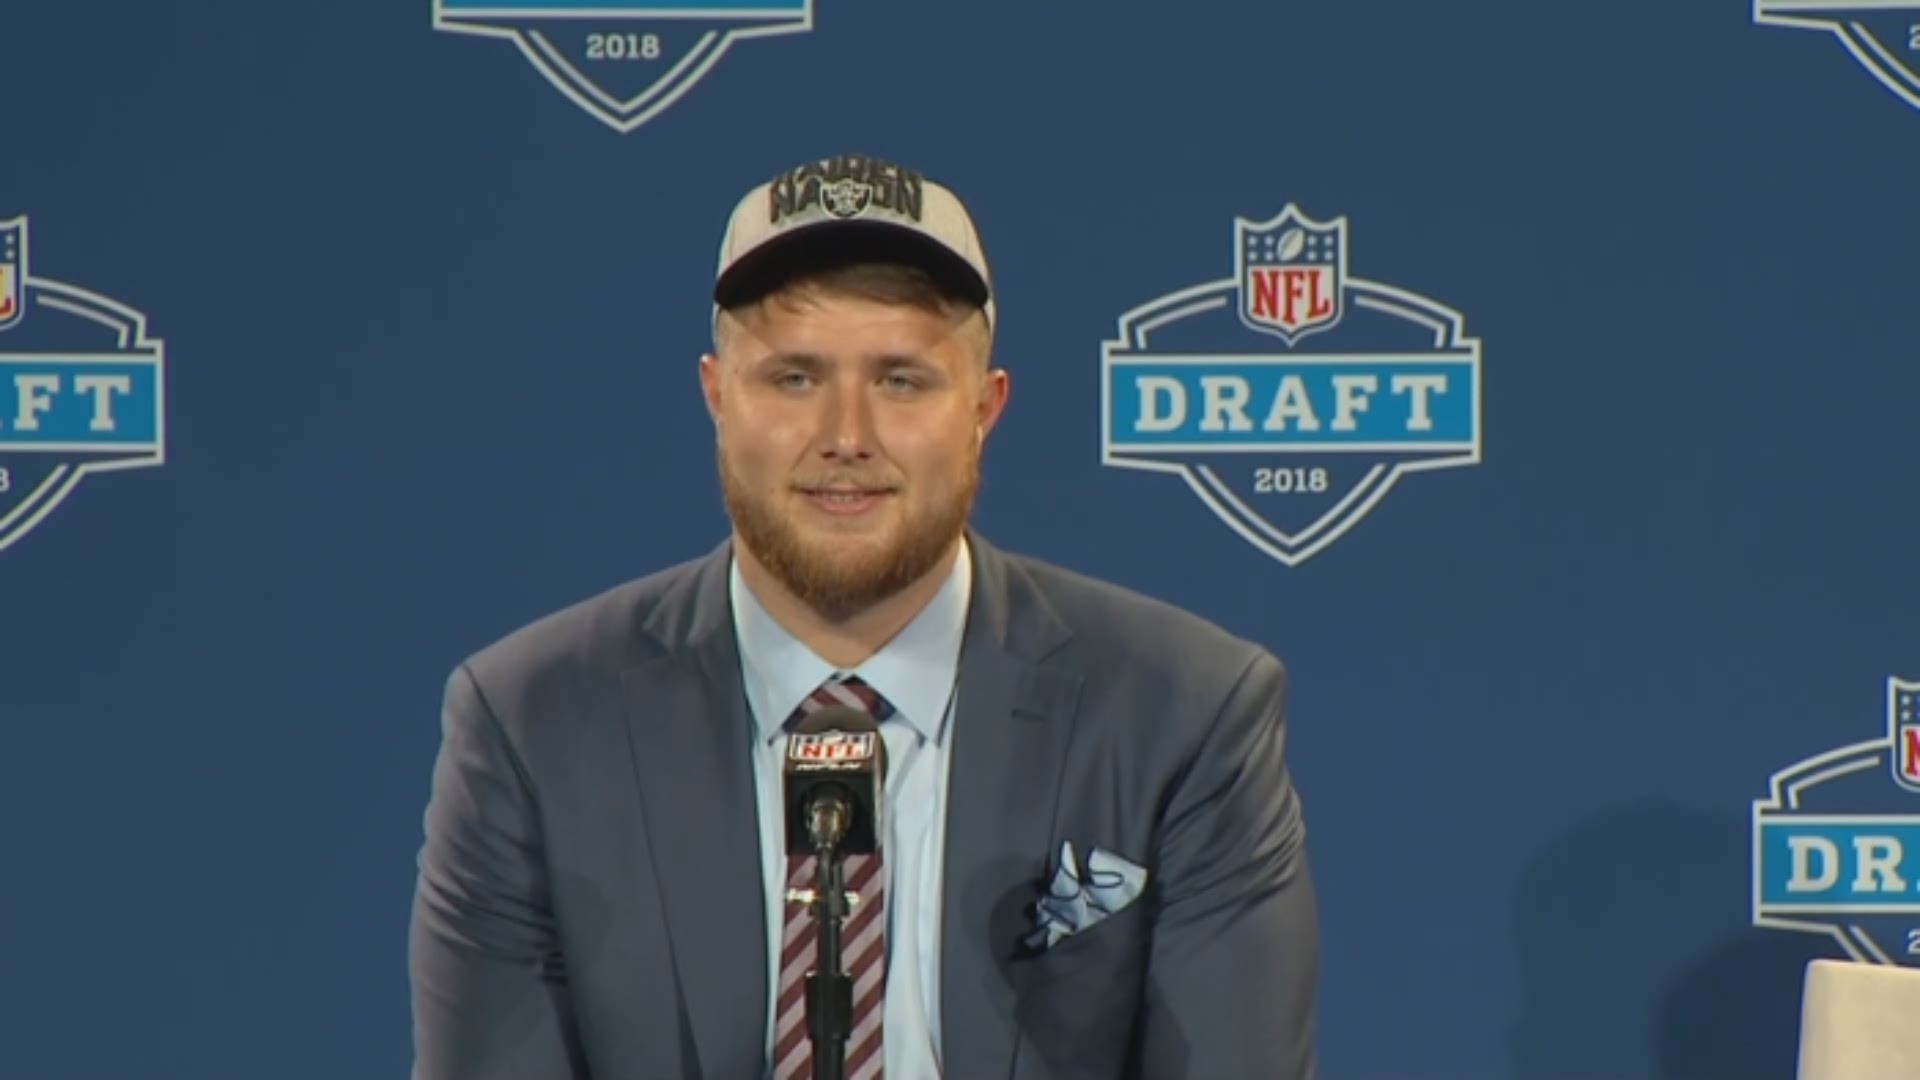 UCLA left tackle Kolton Miller, the former Roseville High School star, talks about being selected with the 15th overall pick in the NFL Draft by the Oakland Raiders.